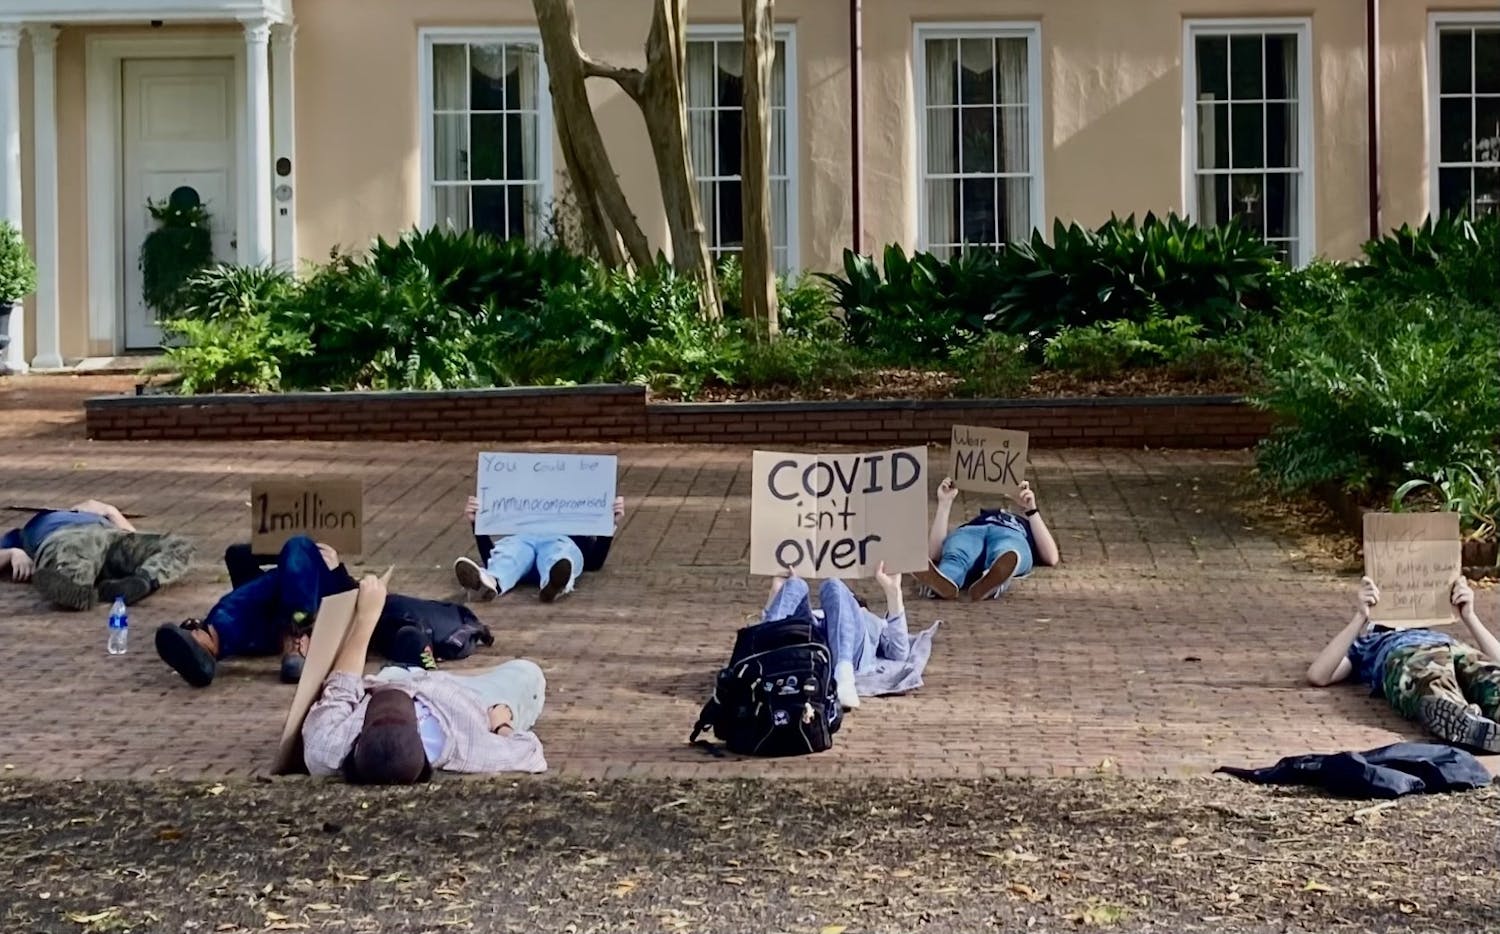 Protestors lay with signs on the Horseshoe at the University of South Carolina on Thursday, March 31, 2022. The protest was held to speak out against the recent removal of UofSC's mask mandate.